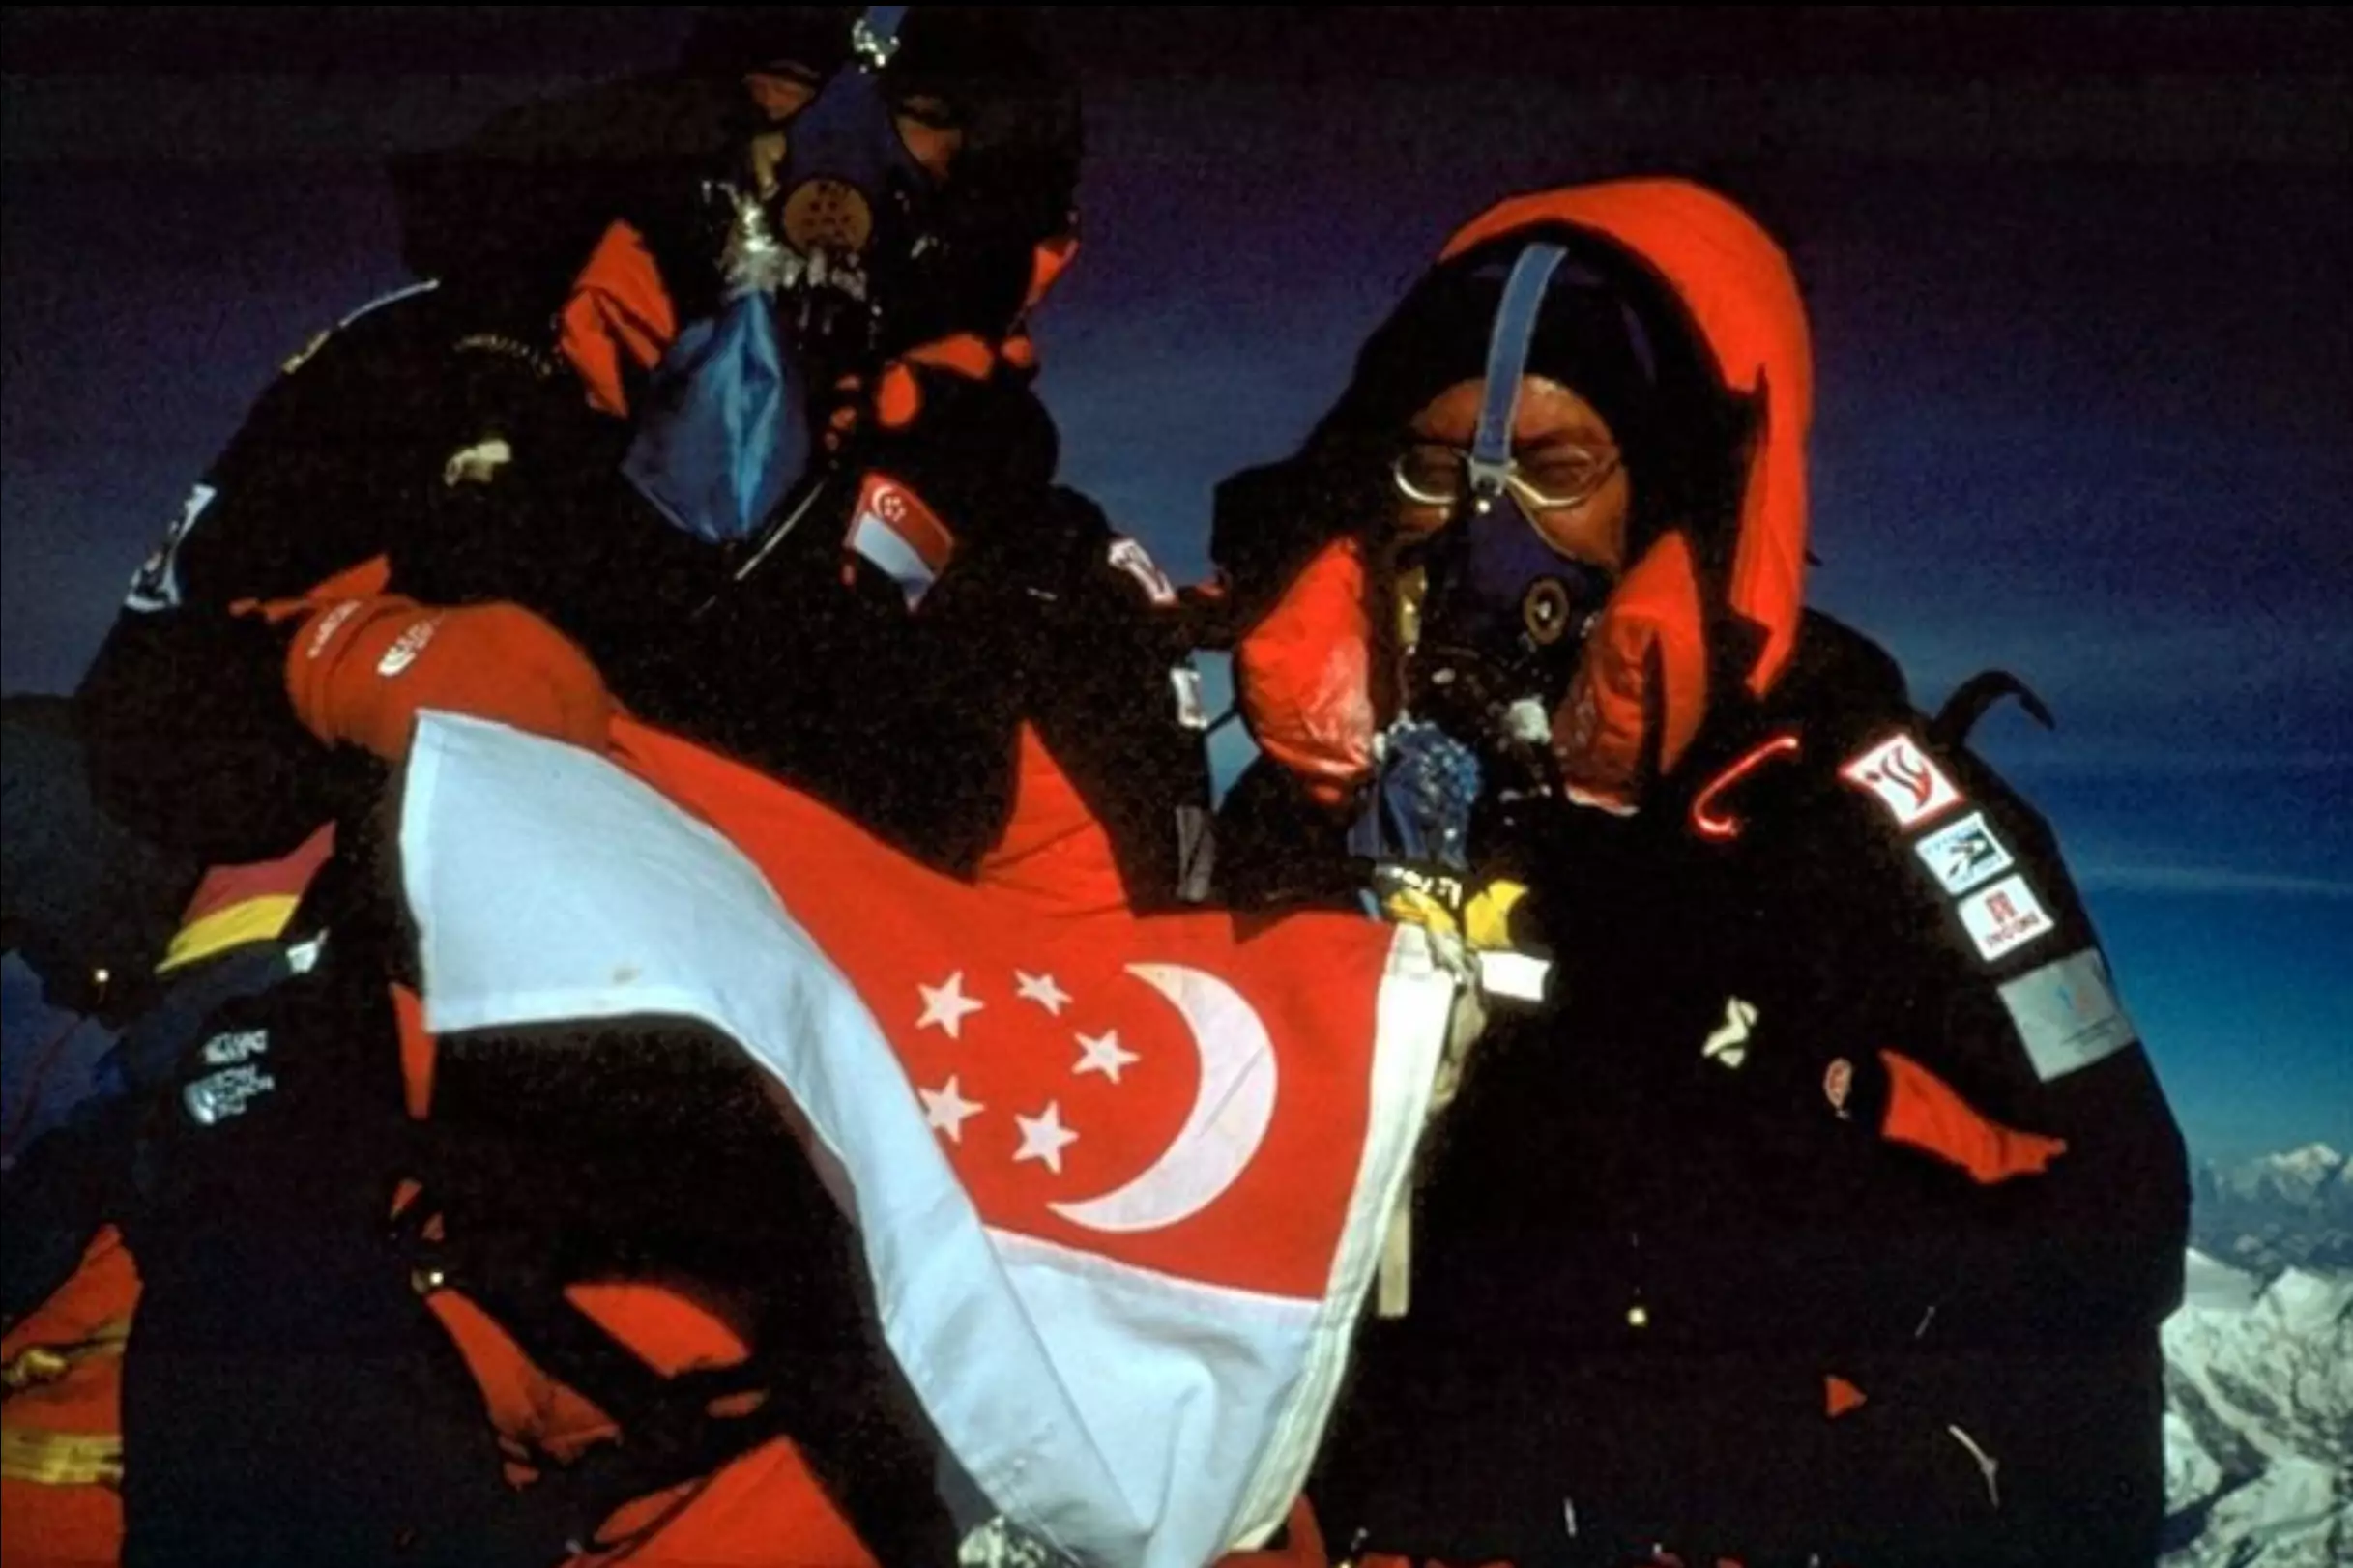 Khoo Swee Chiow summits mount everest in 1998